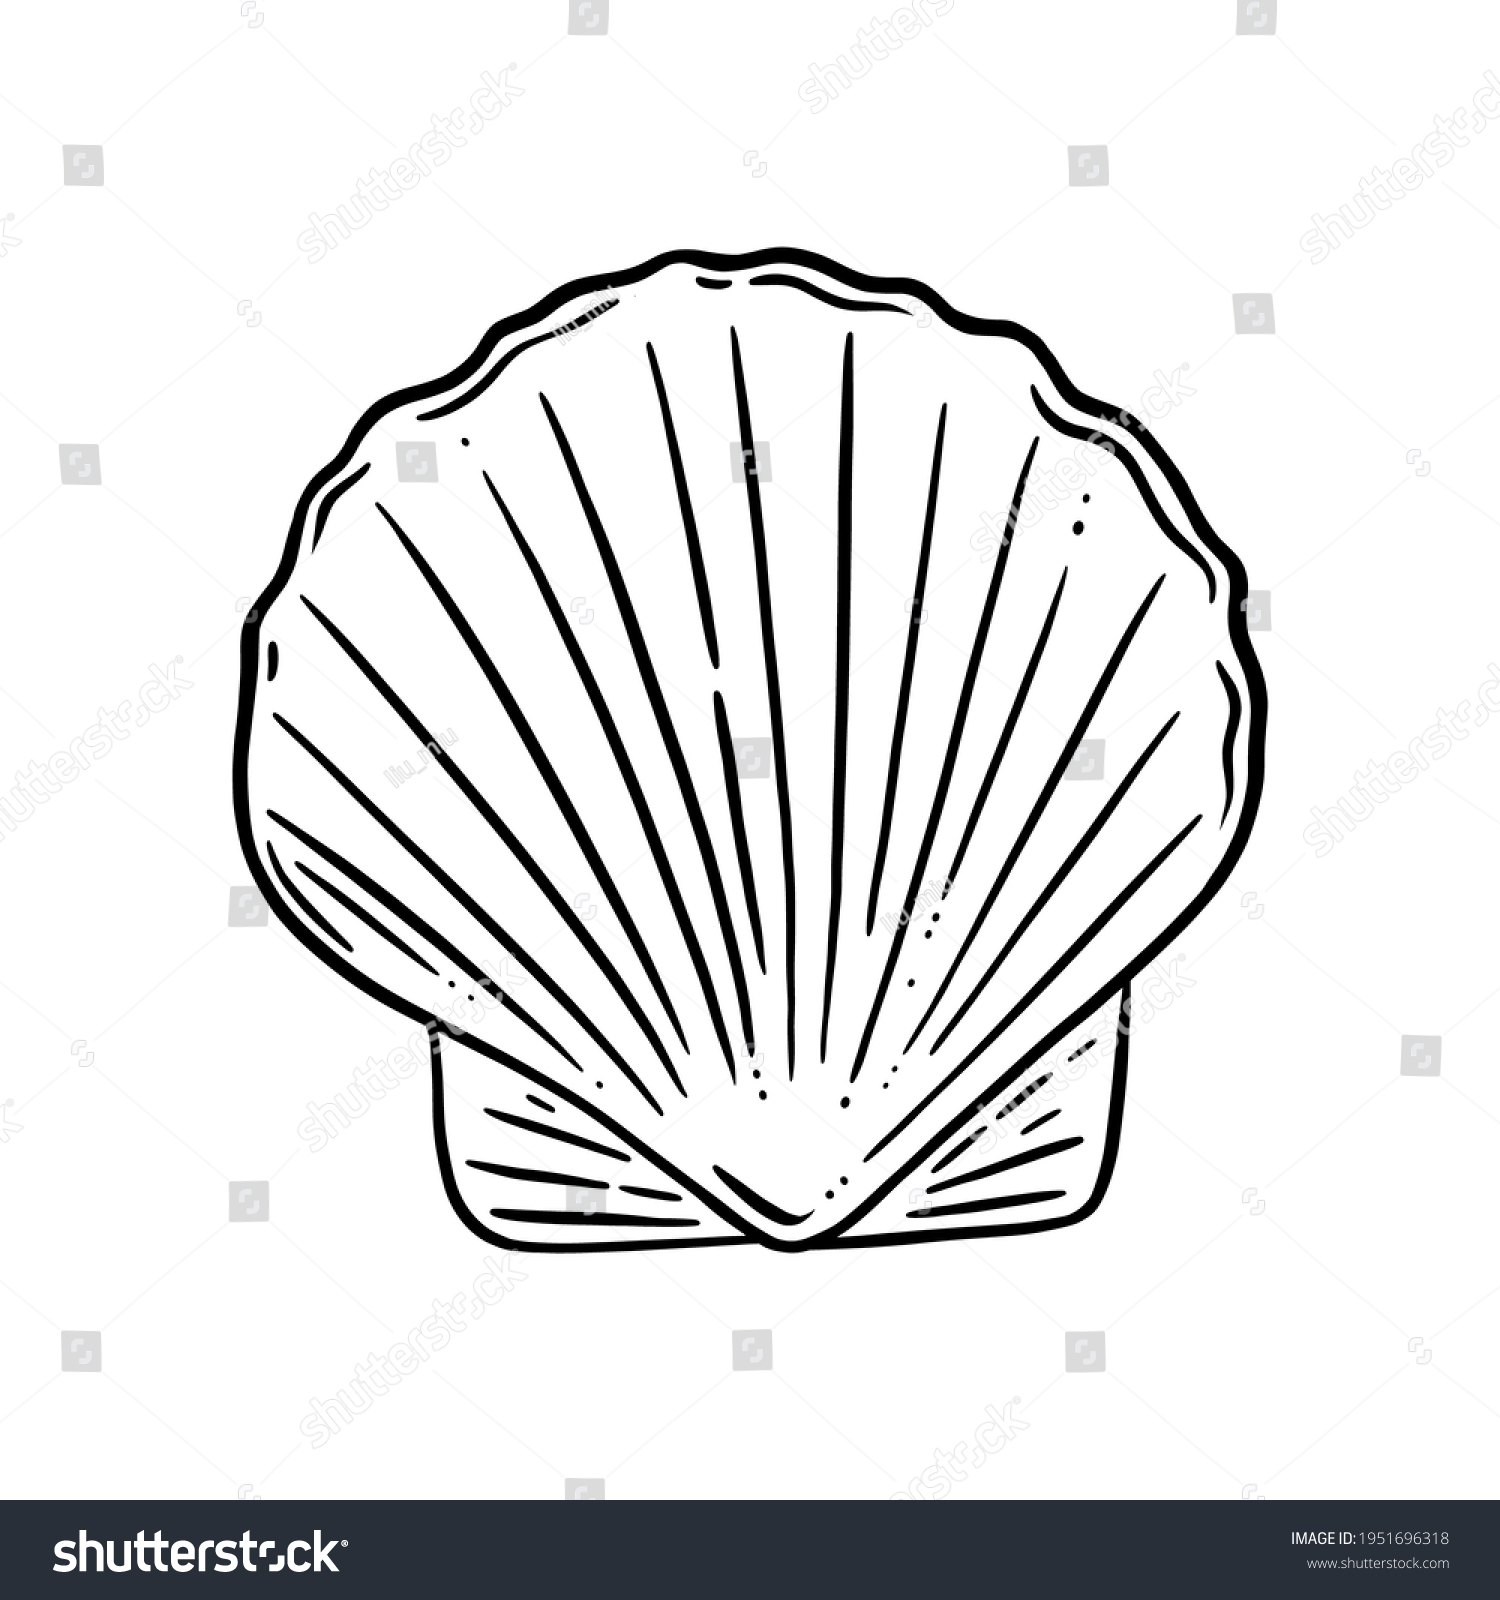 SVG of Scallop shell logo. Seashell with a pearl or ready for cooking. Vector illustration isolated in white background svg